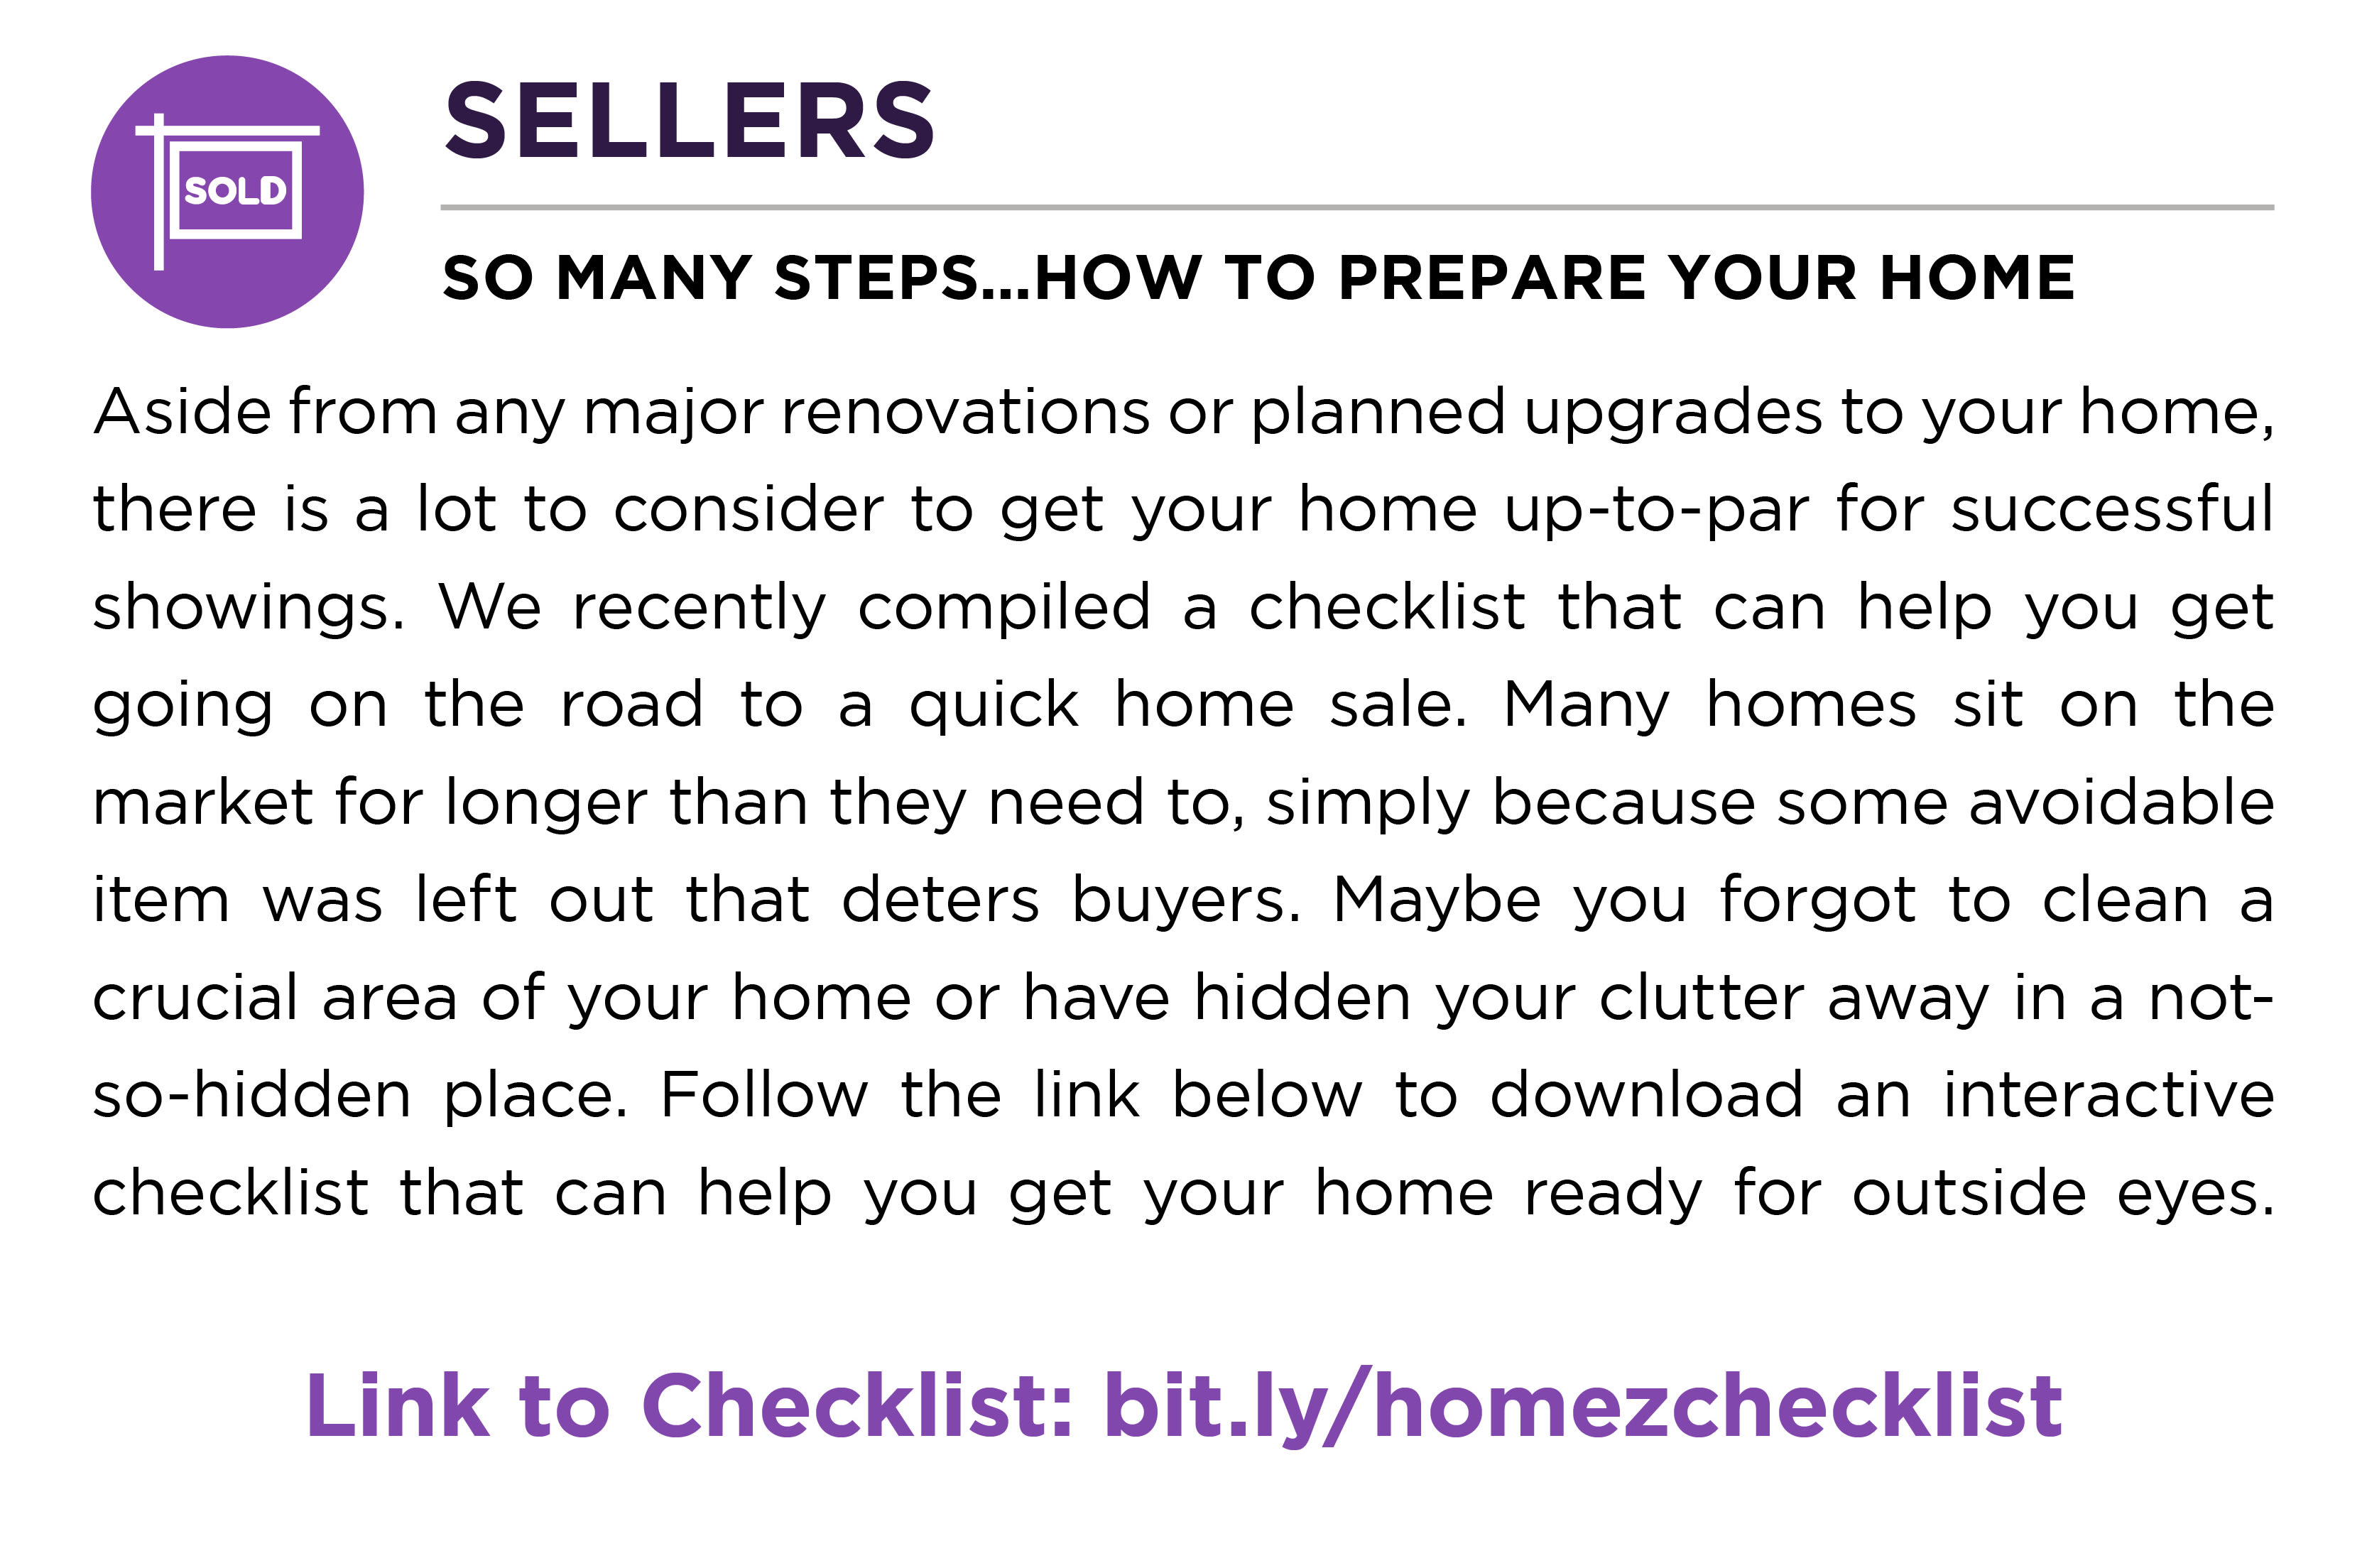 Prepare to sell your home